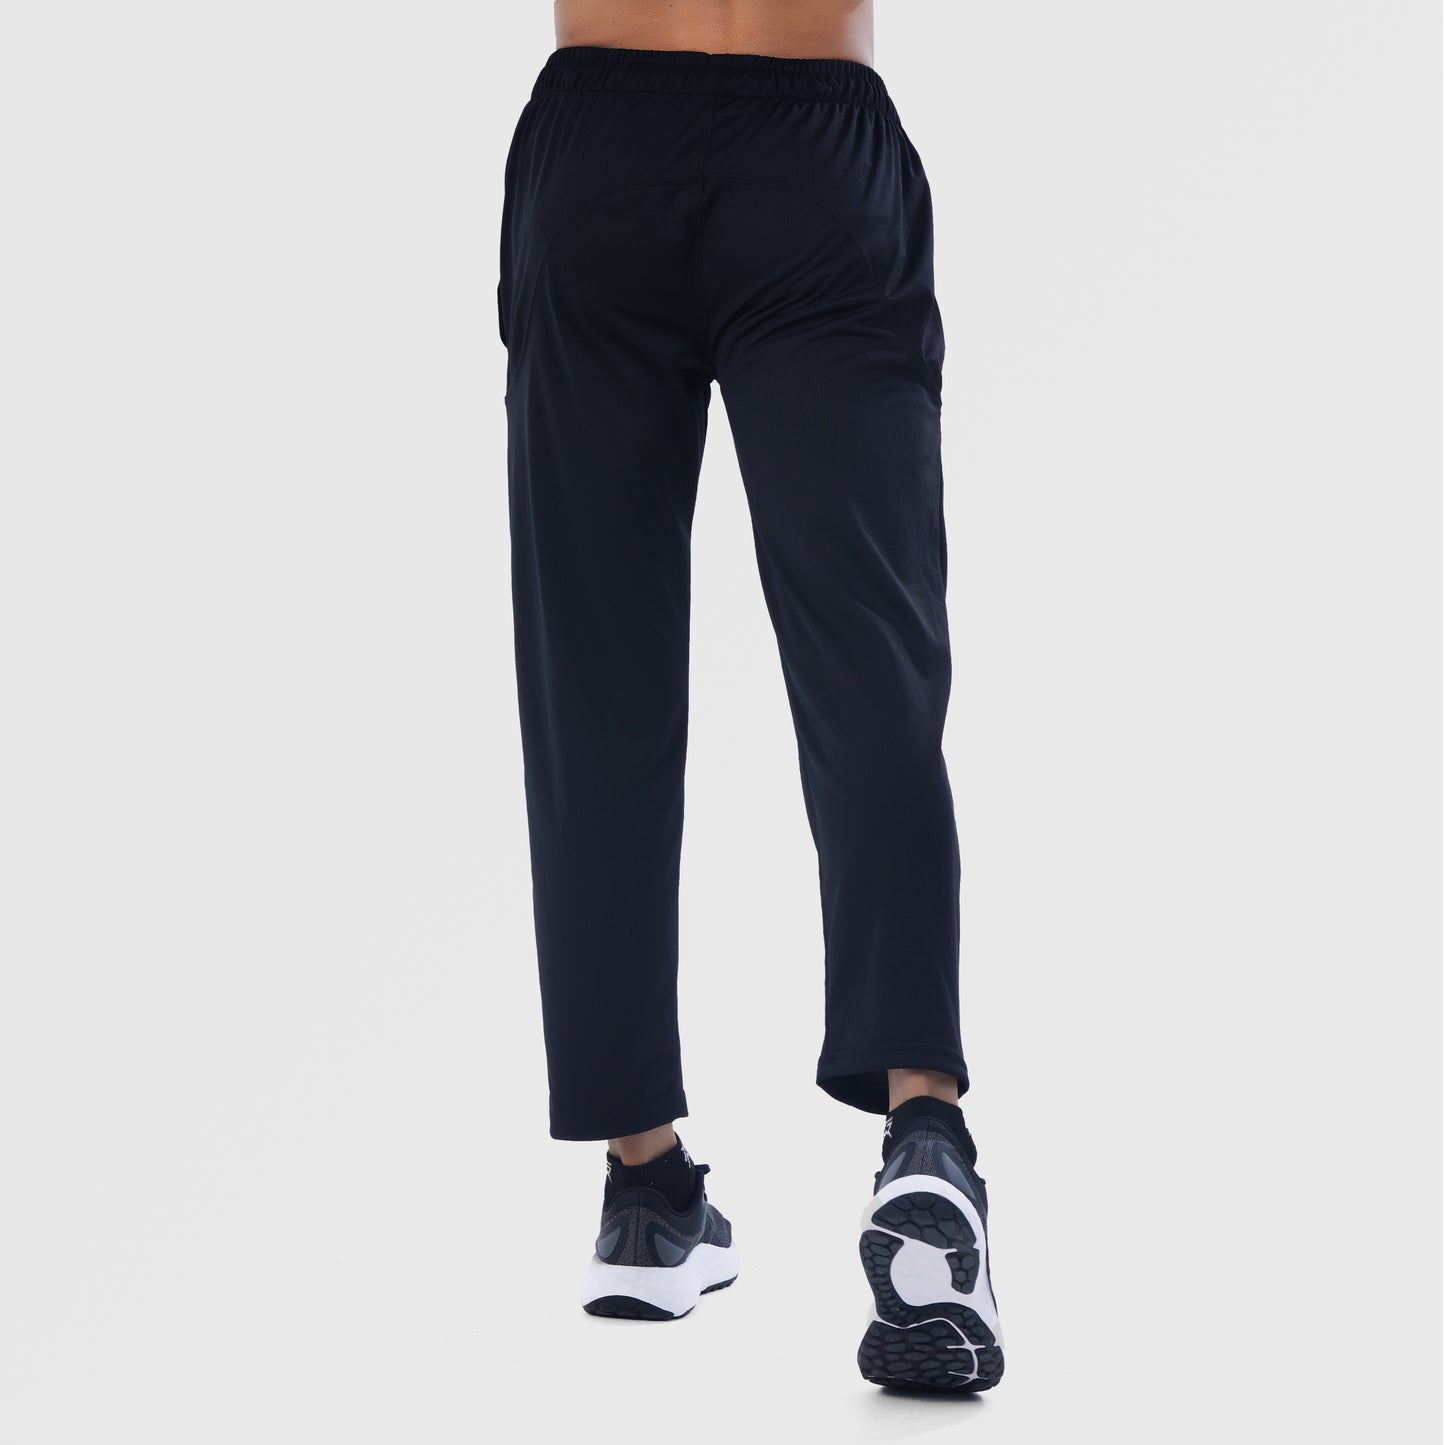 Voyager Trousers (Black)